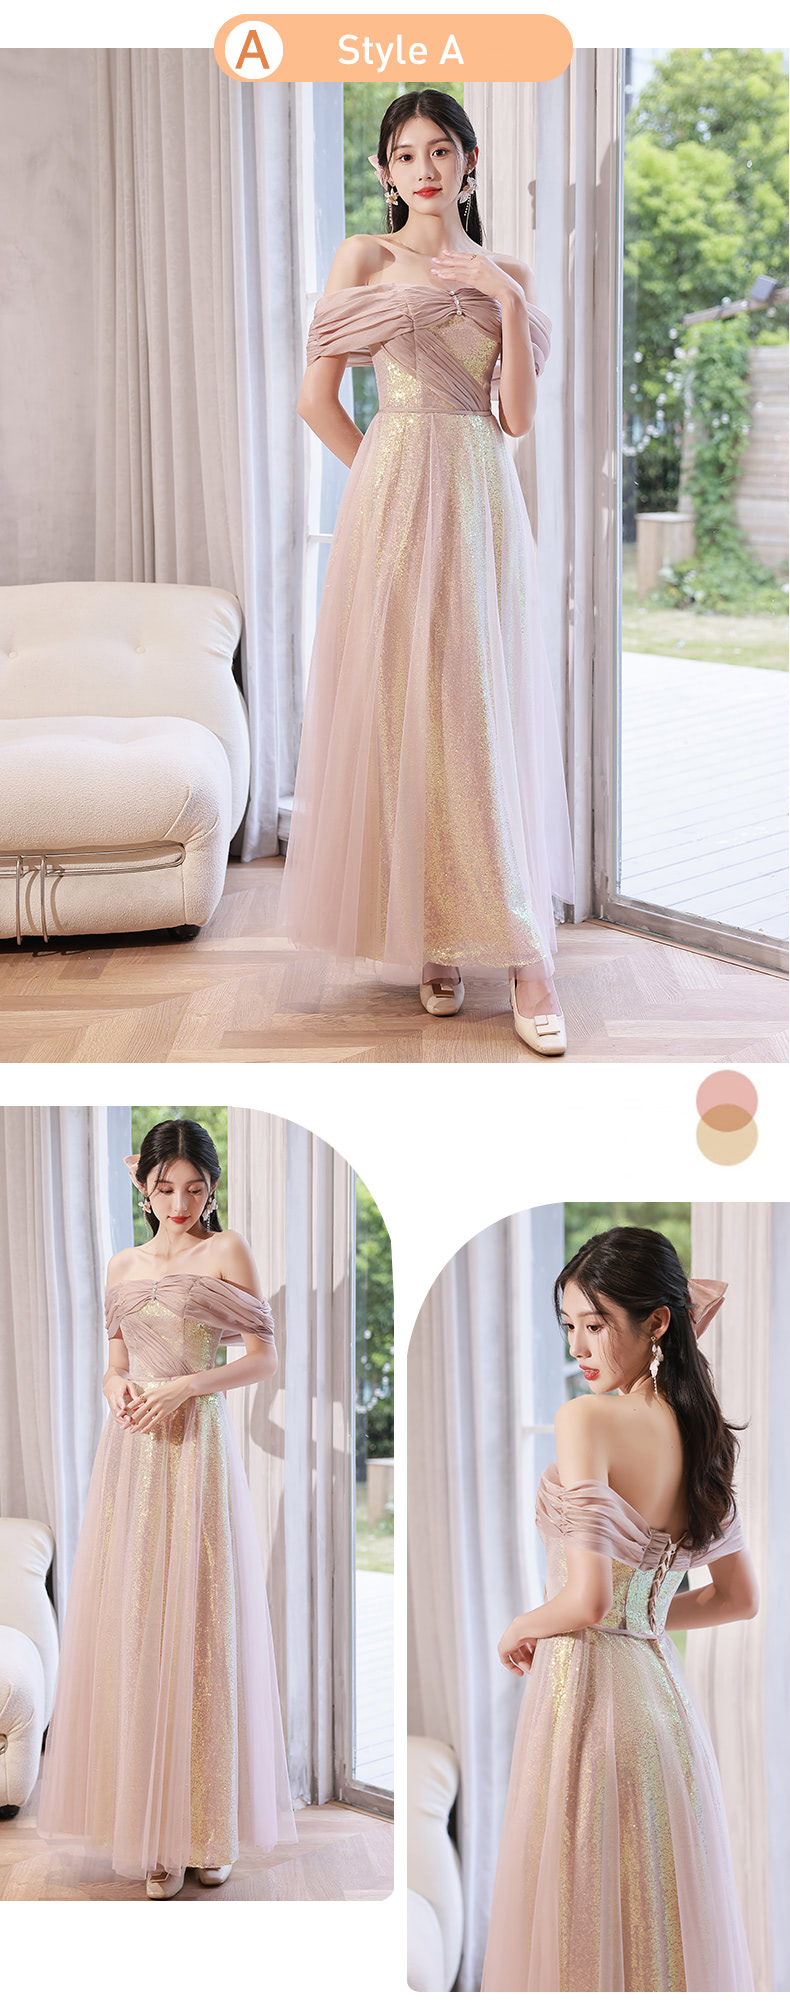 Fairy-Starry-Pink-Slim-Bridesmaid-Long-Dress-Wedding-Party-Gown14.jpg